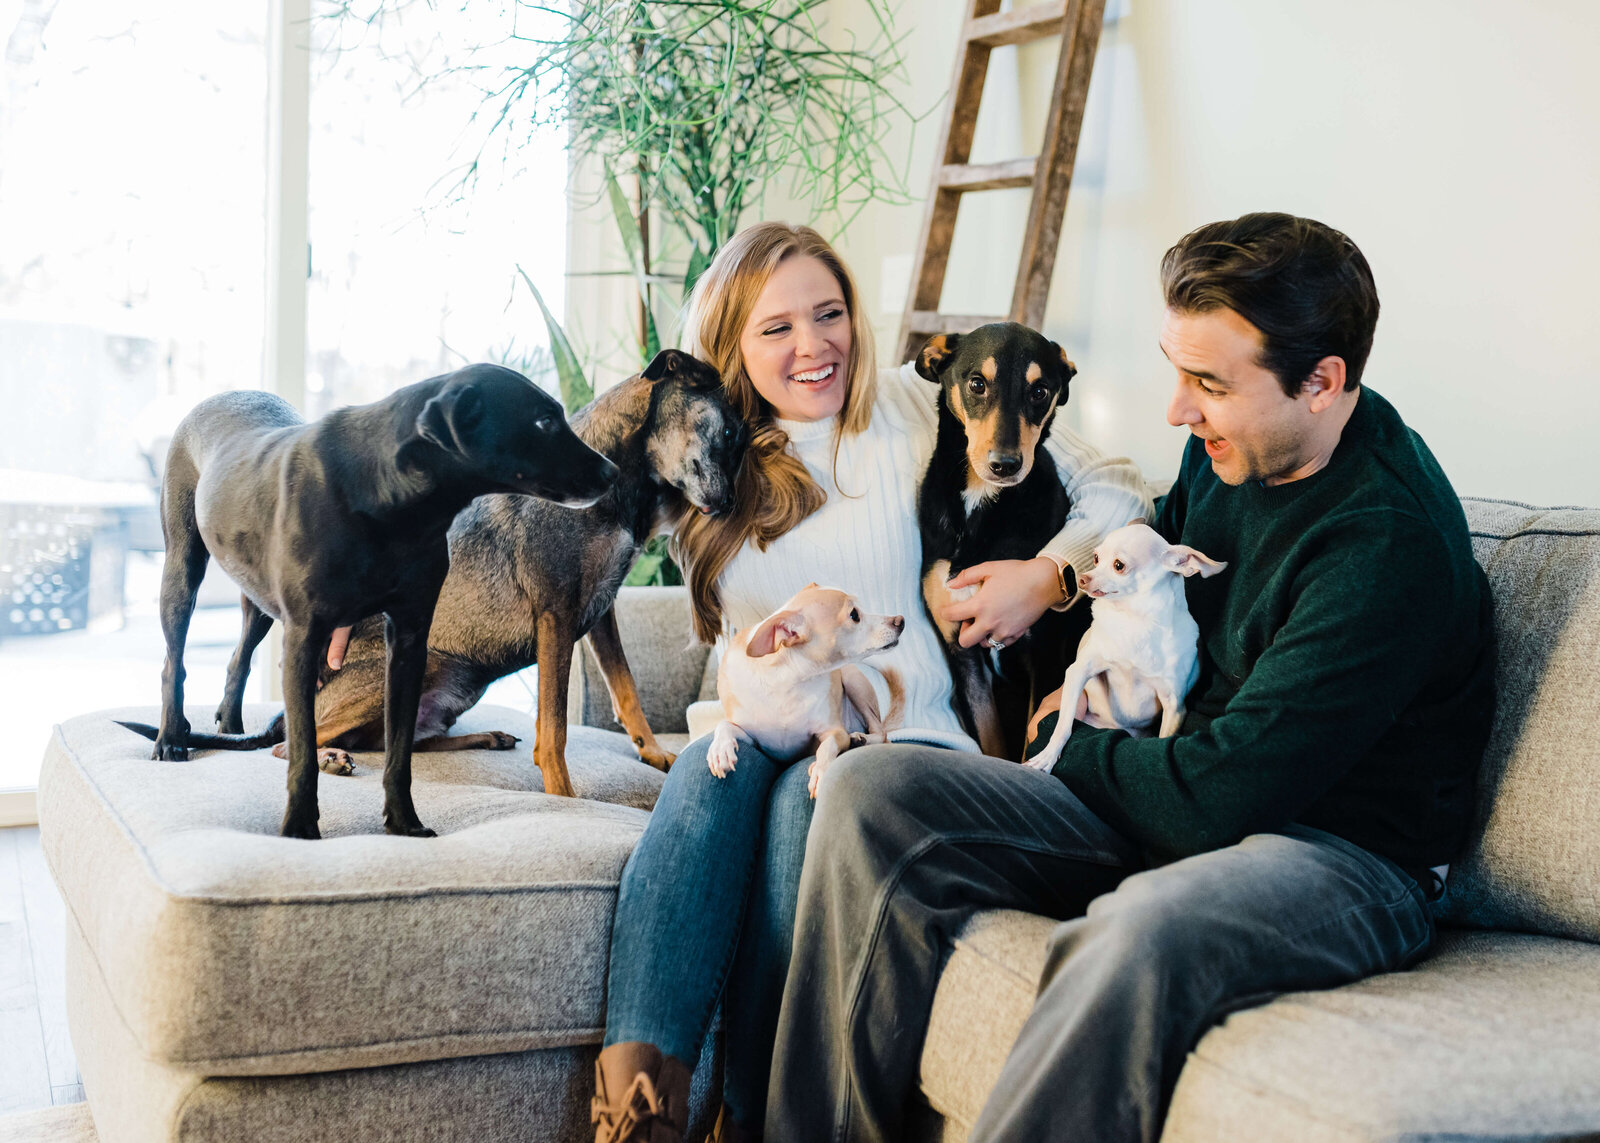 Husband and wife sit on a couch together with their 5 dogs